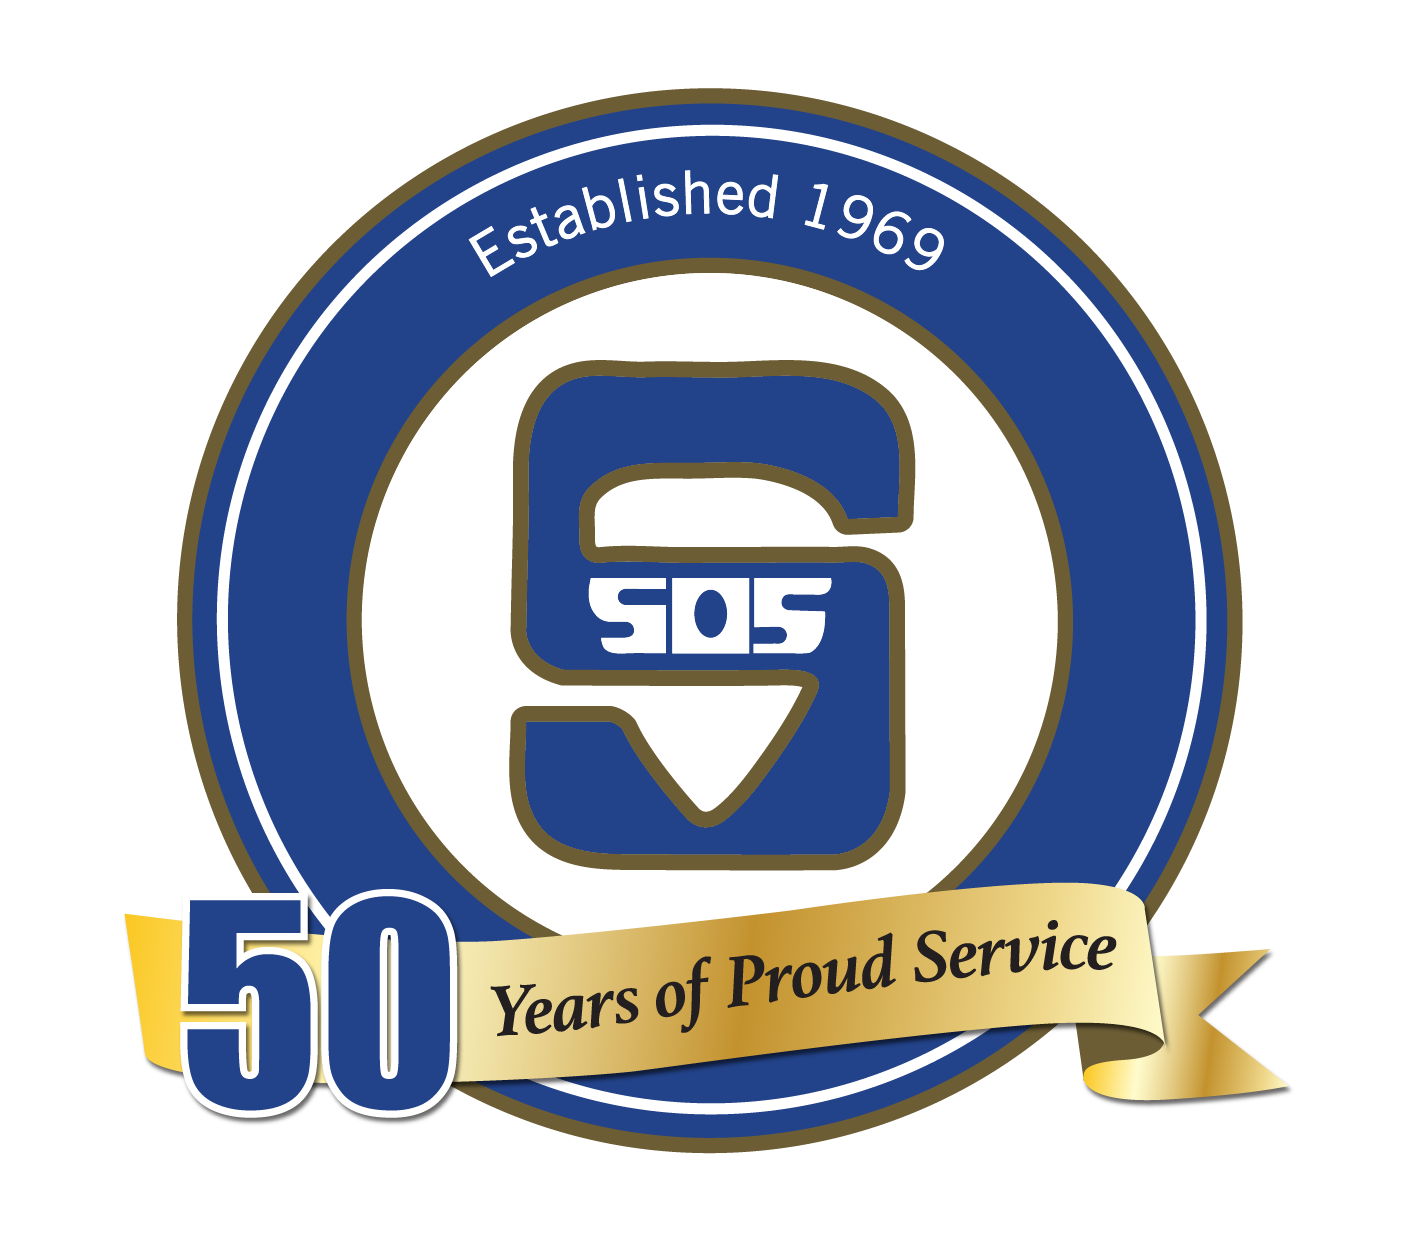 SOS Security is celebrating 50 years of proud service.